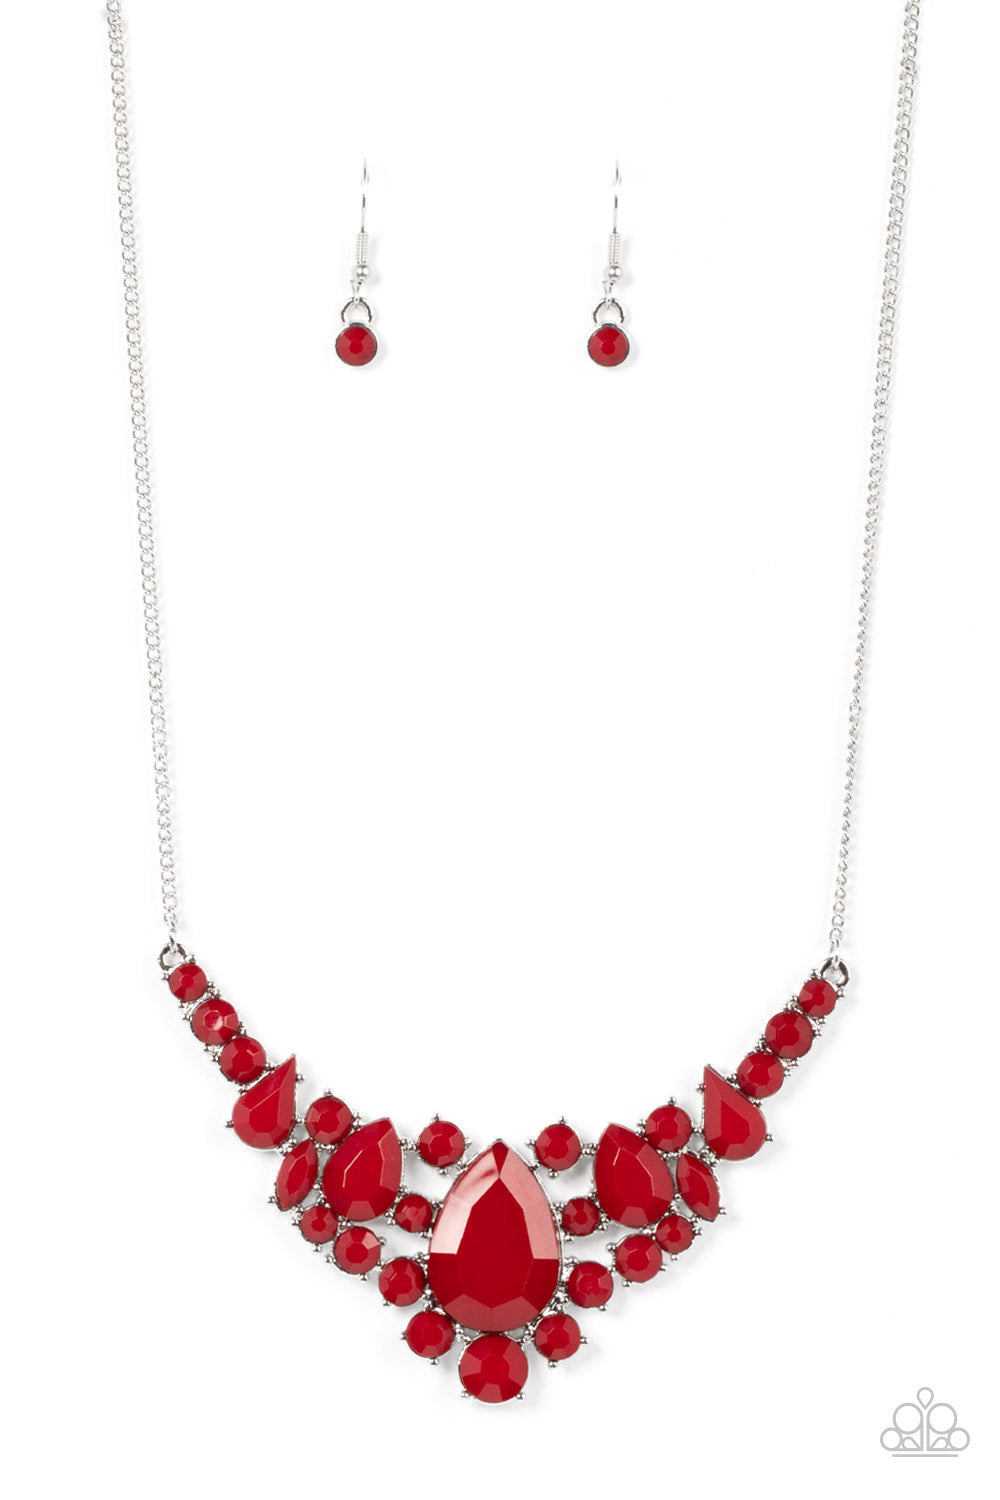 Bali Ballroom - Red Round, Teardrop, Marquise Style Beaded Paparazzi Necklace & matching earrings